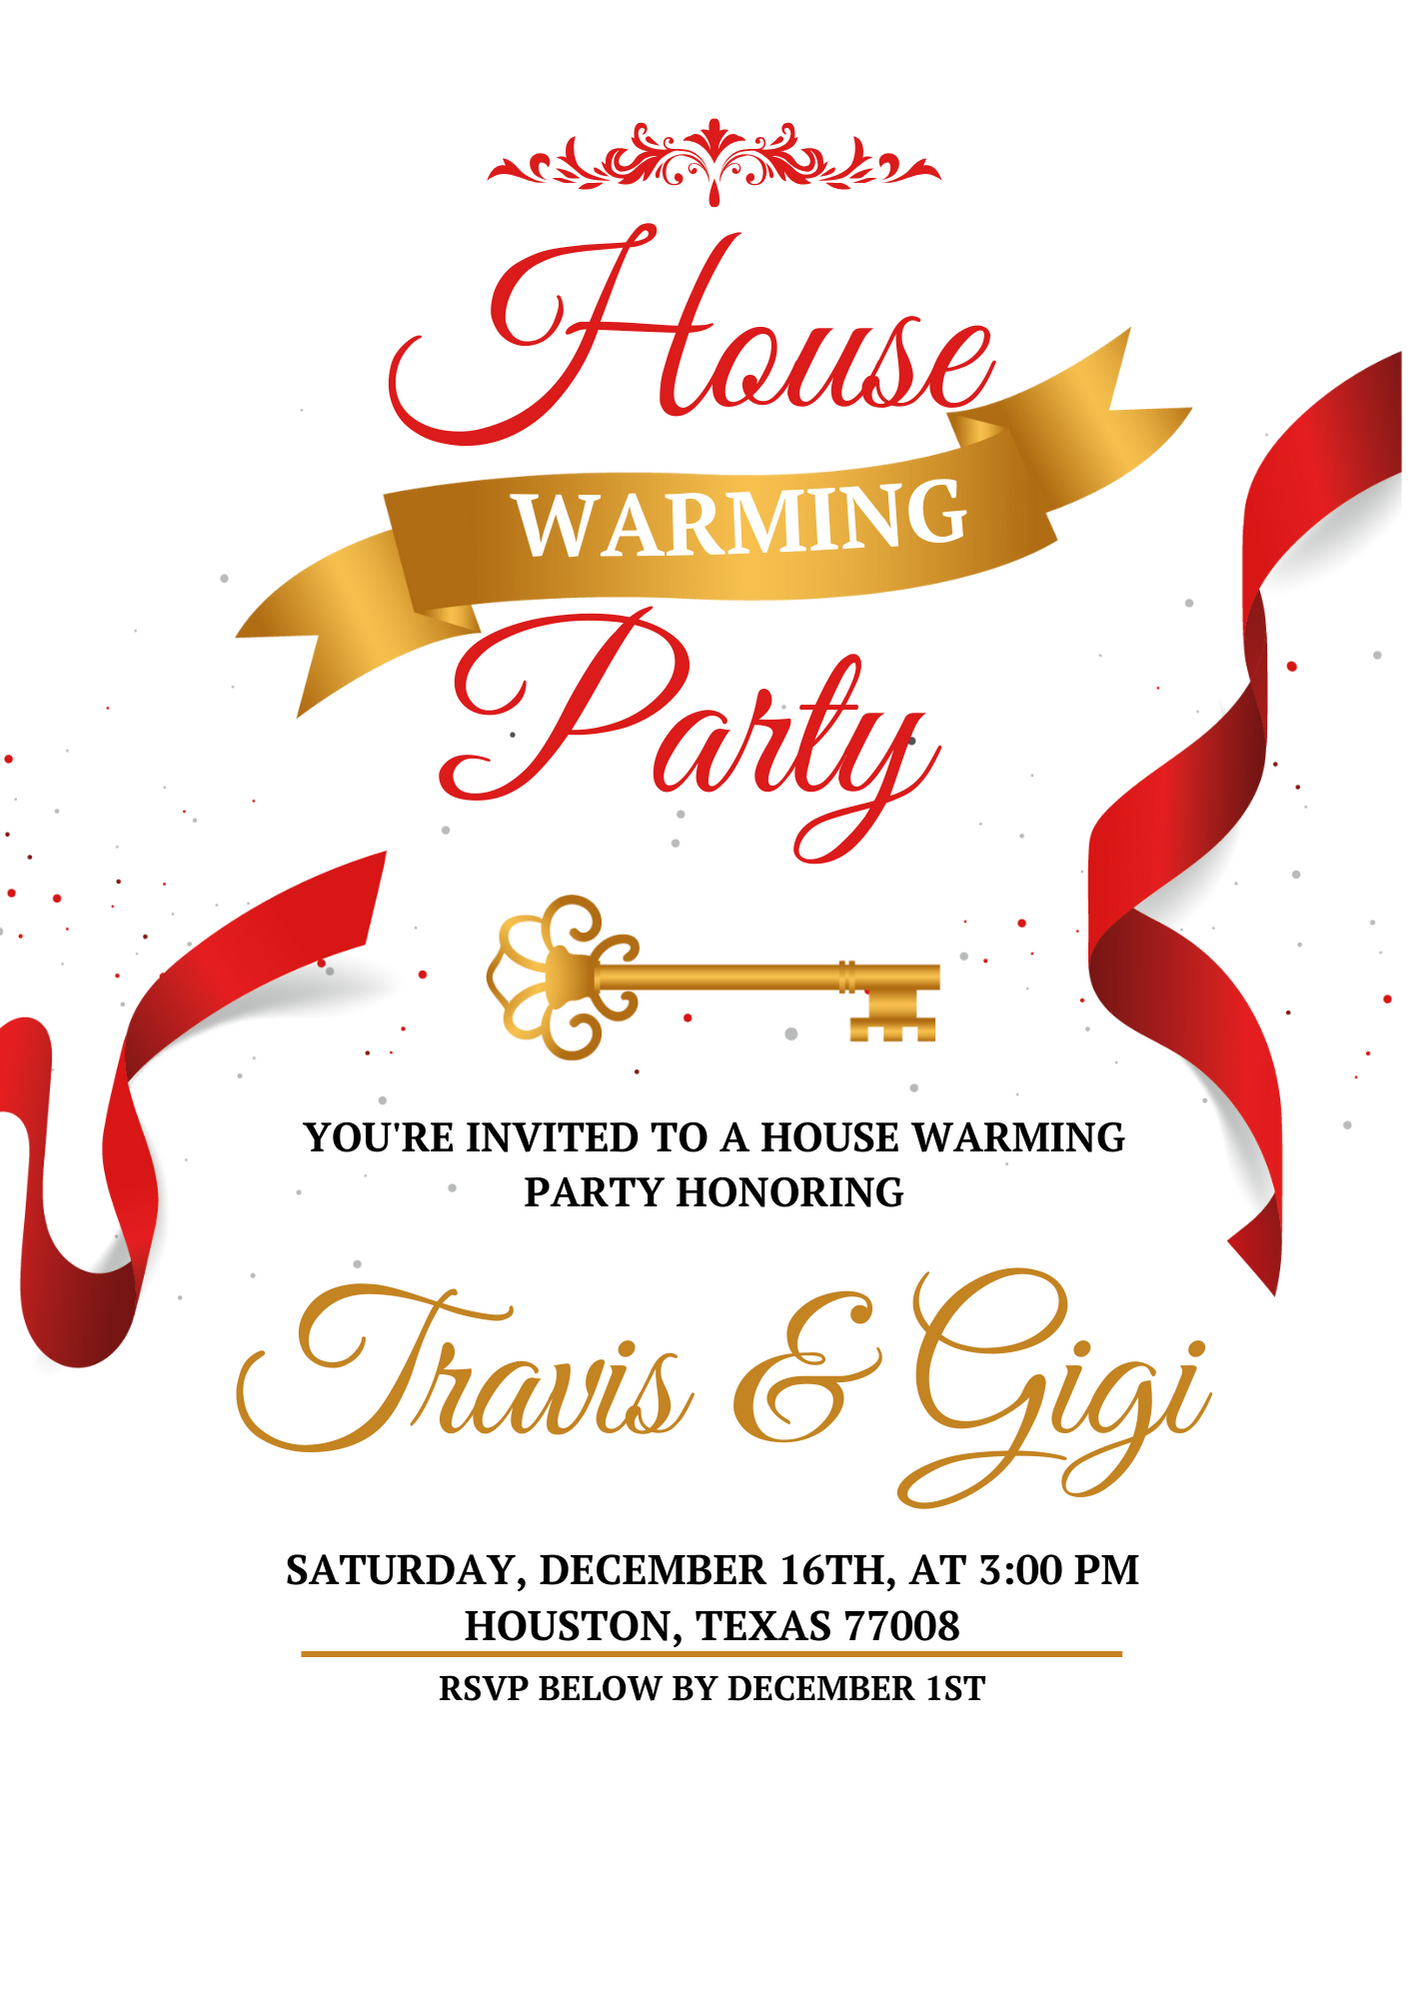 House Warming Party Invitation 